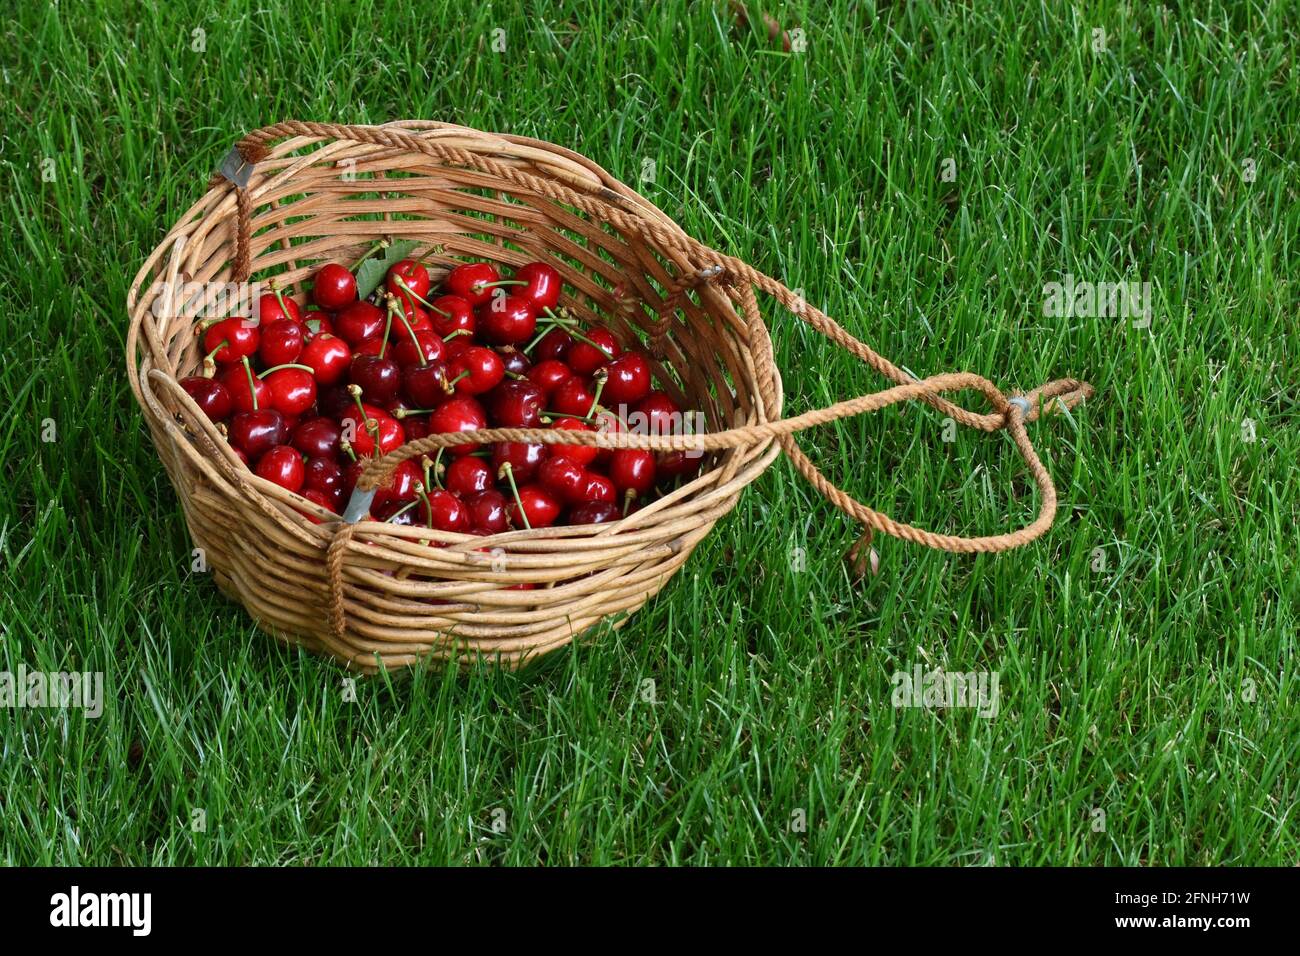 Cherries basket on a green lawn Stock Photo